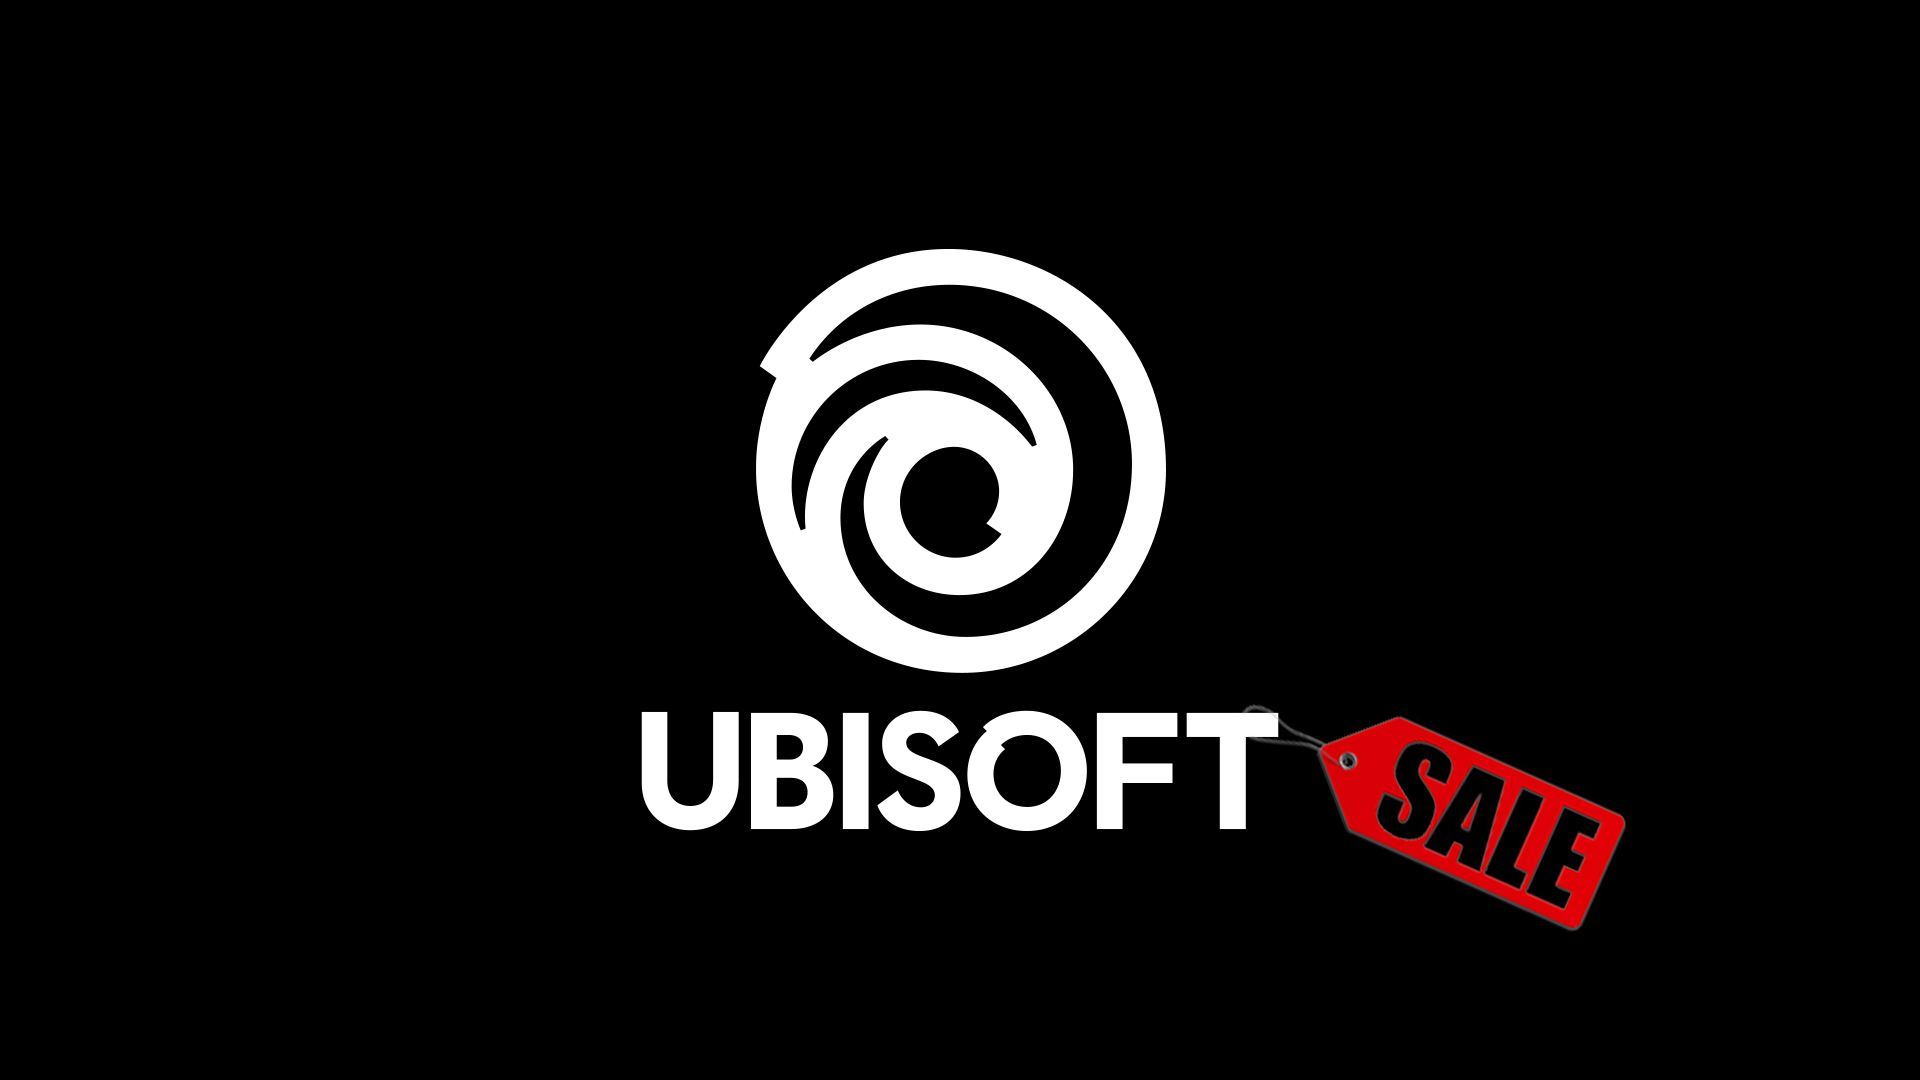 Ubisoft Wants To Remain Independent But Will Review Potential Acquisition Offers